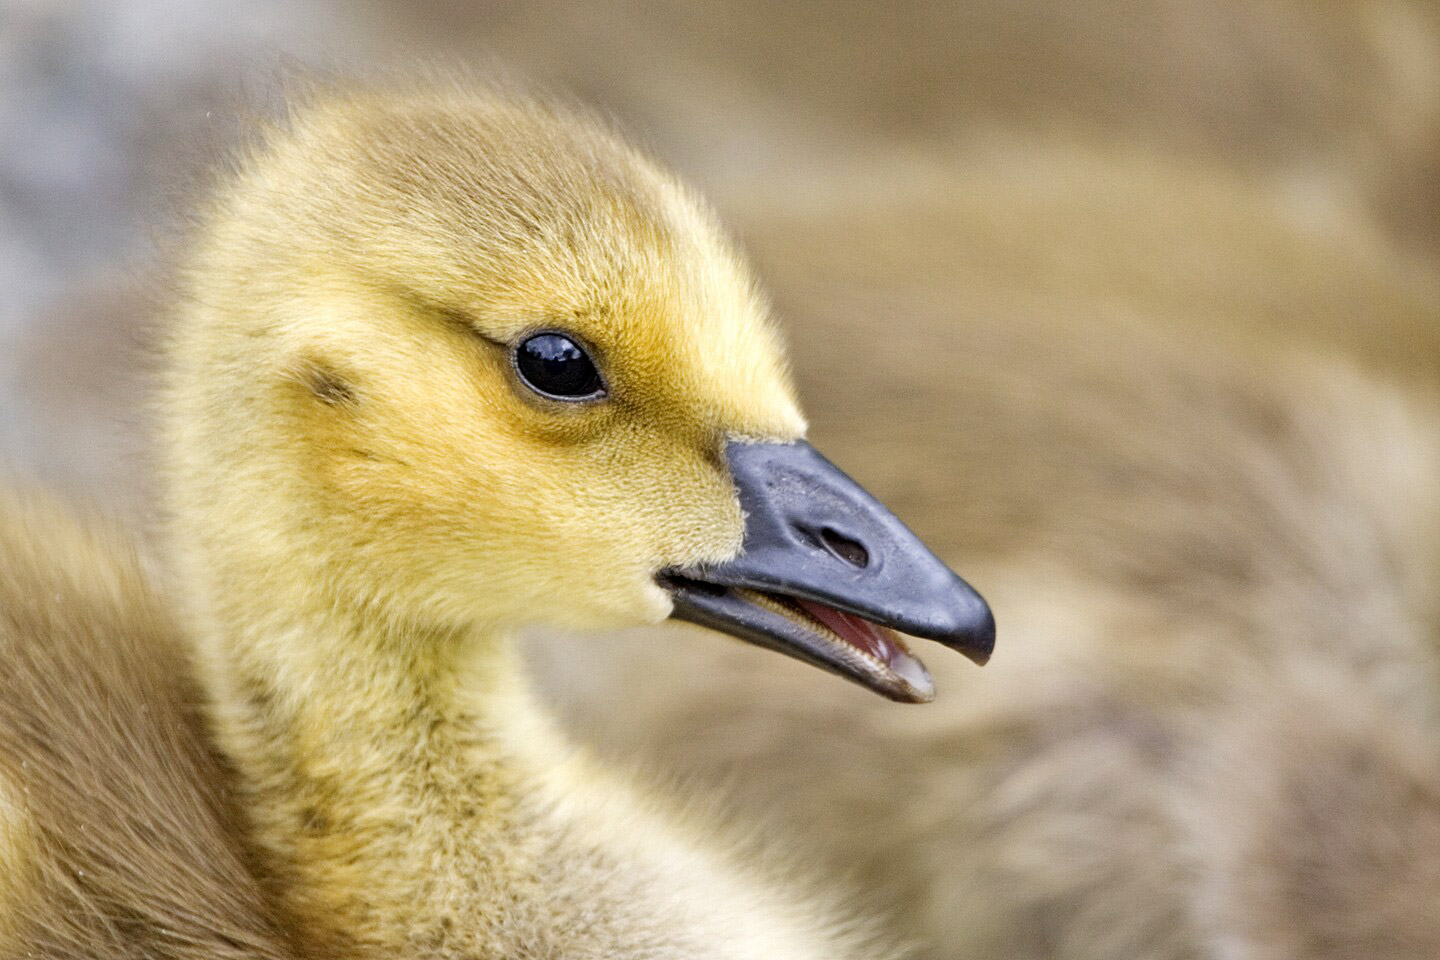 The yellow plumage of a Canada Goose gosling, Photographed at Burnaby Lake Regional Park (Piper Spit), Burnaby, British Columbia.